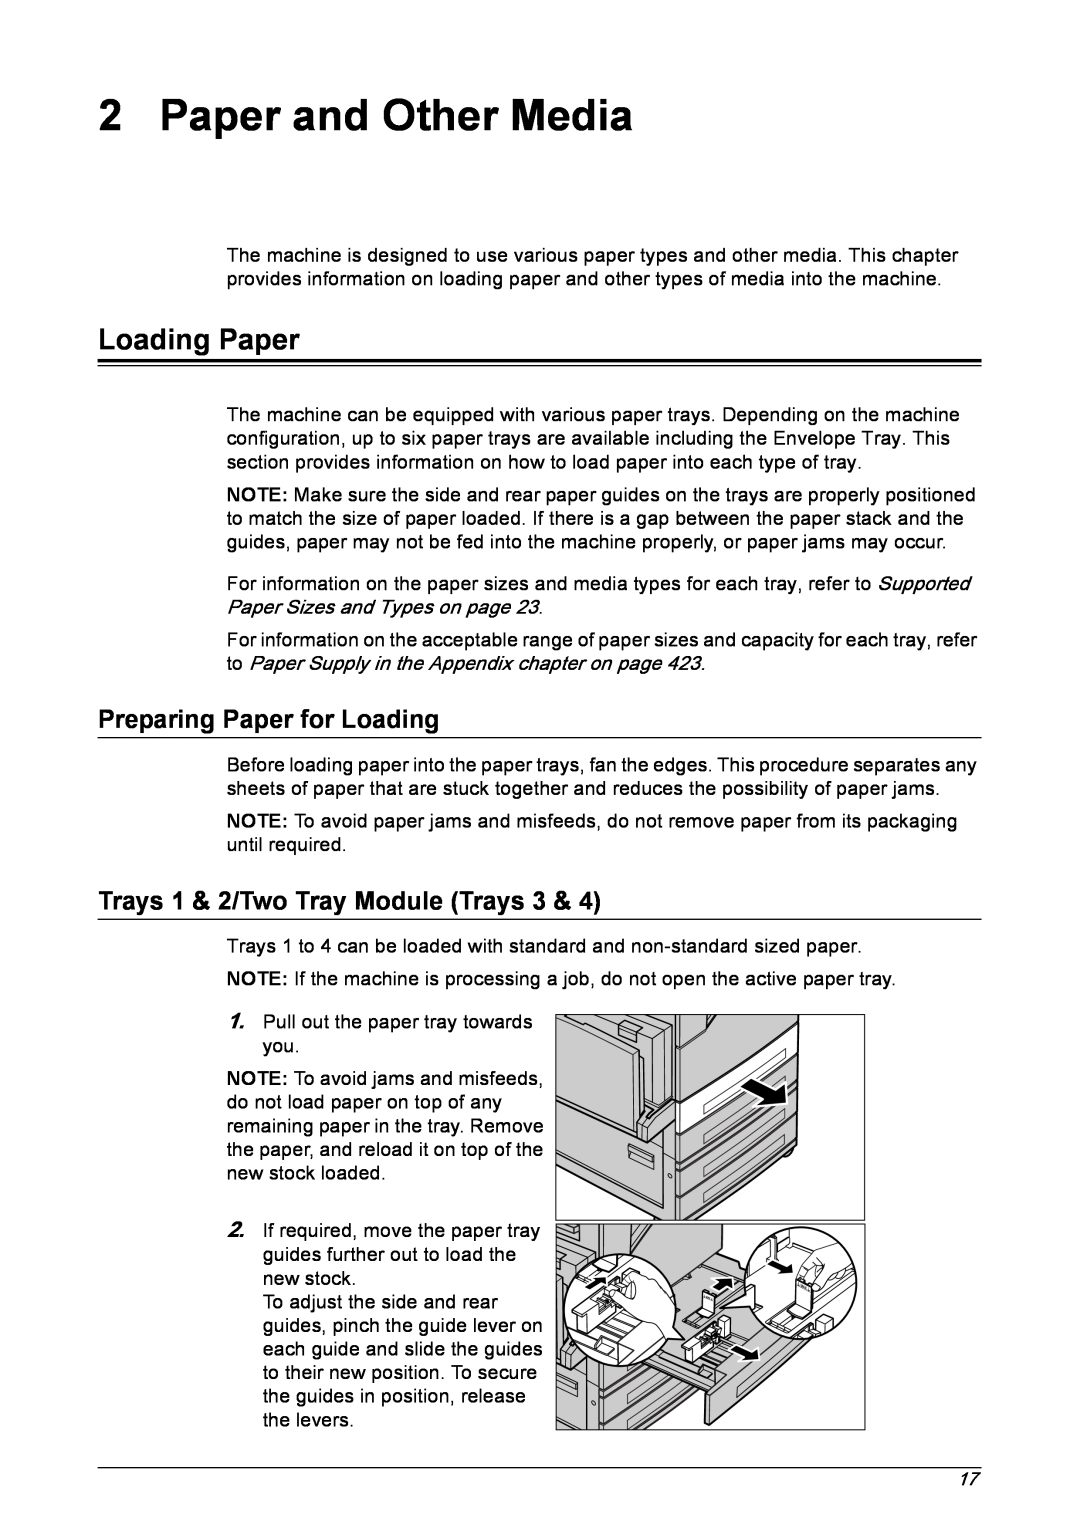 Xerox 5222 manual Paper and Other Media, Loading Paper, Preparing Paper for Loading, Trays 1 & 2/Two Tray Module Trays 3 